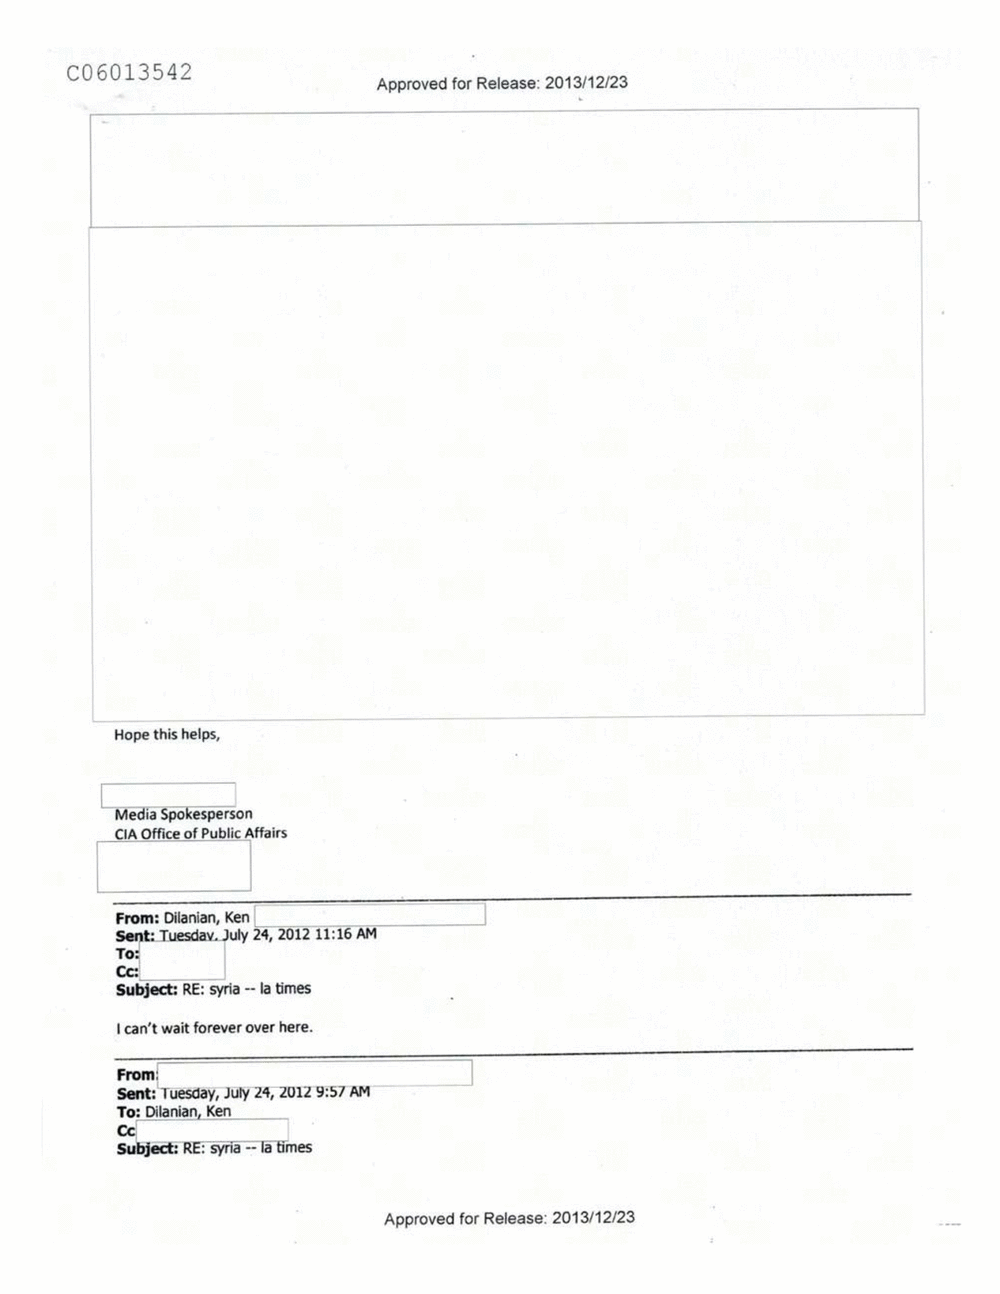 Page 400 from Email Correspondence Between Reporters and CIA Flacks